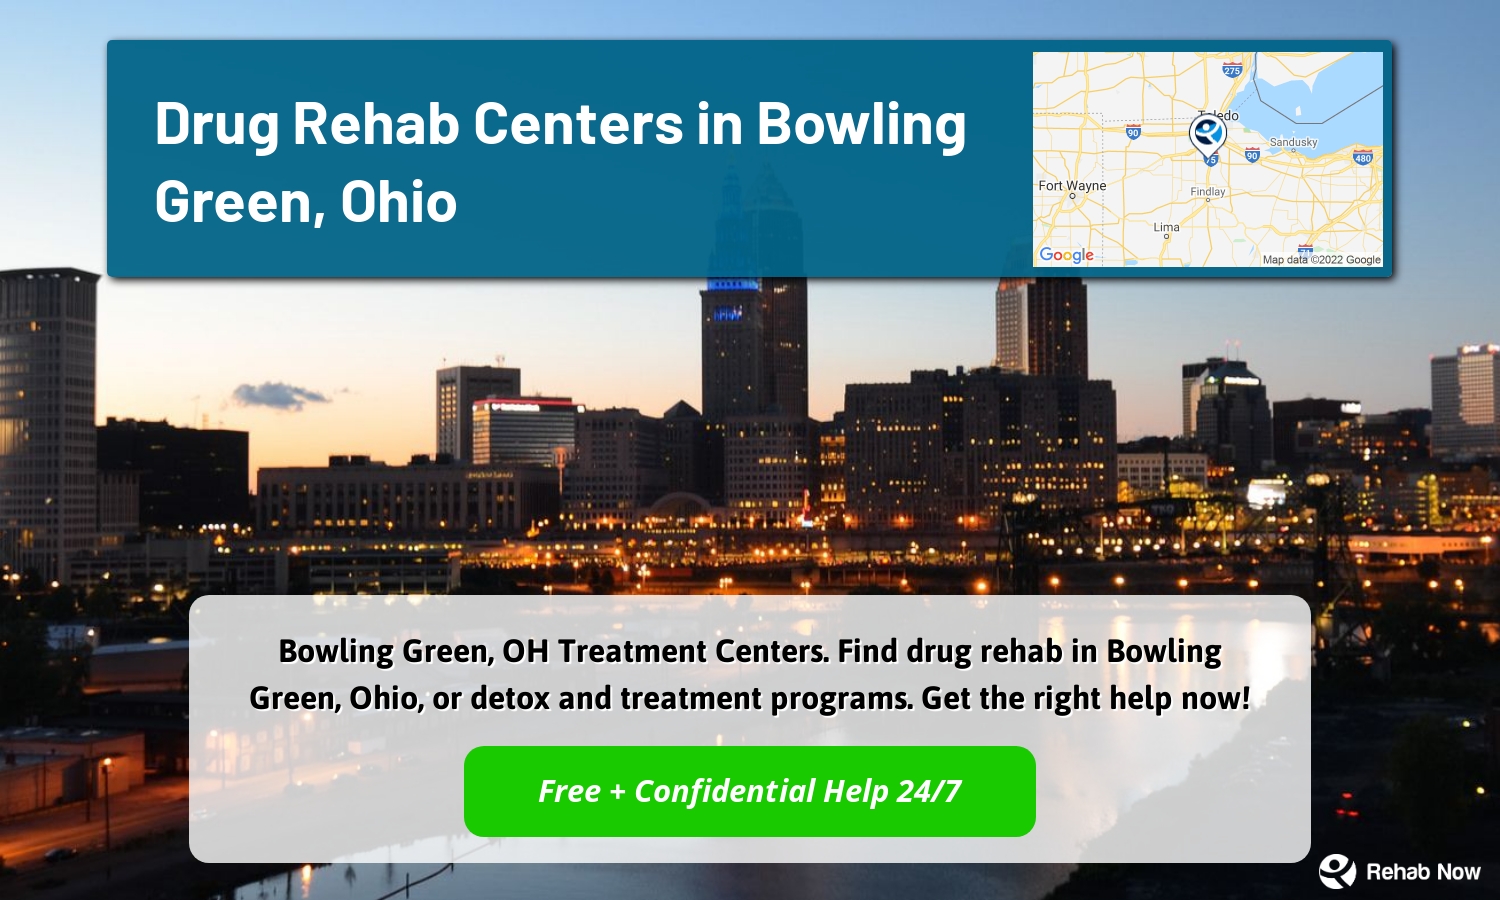 Bowling Green, OH Treatment Centers. Find drug rehab in Bowling Green, Ohio, or detox and treatment programs. Get the right help now!